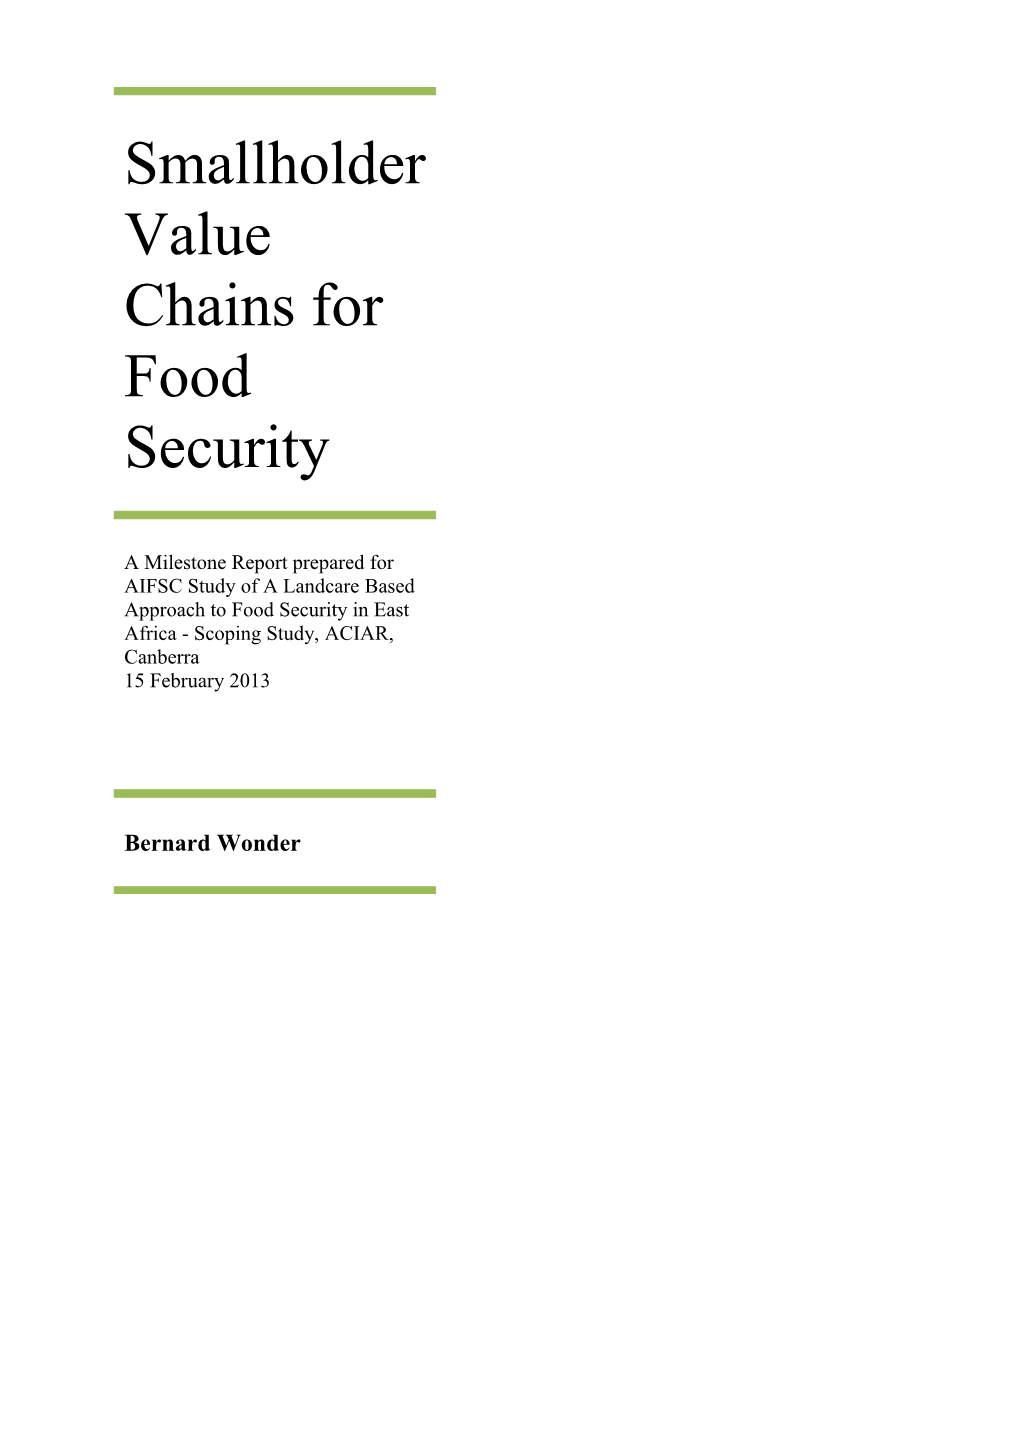 Smallholder Value Chains For Food Security